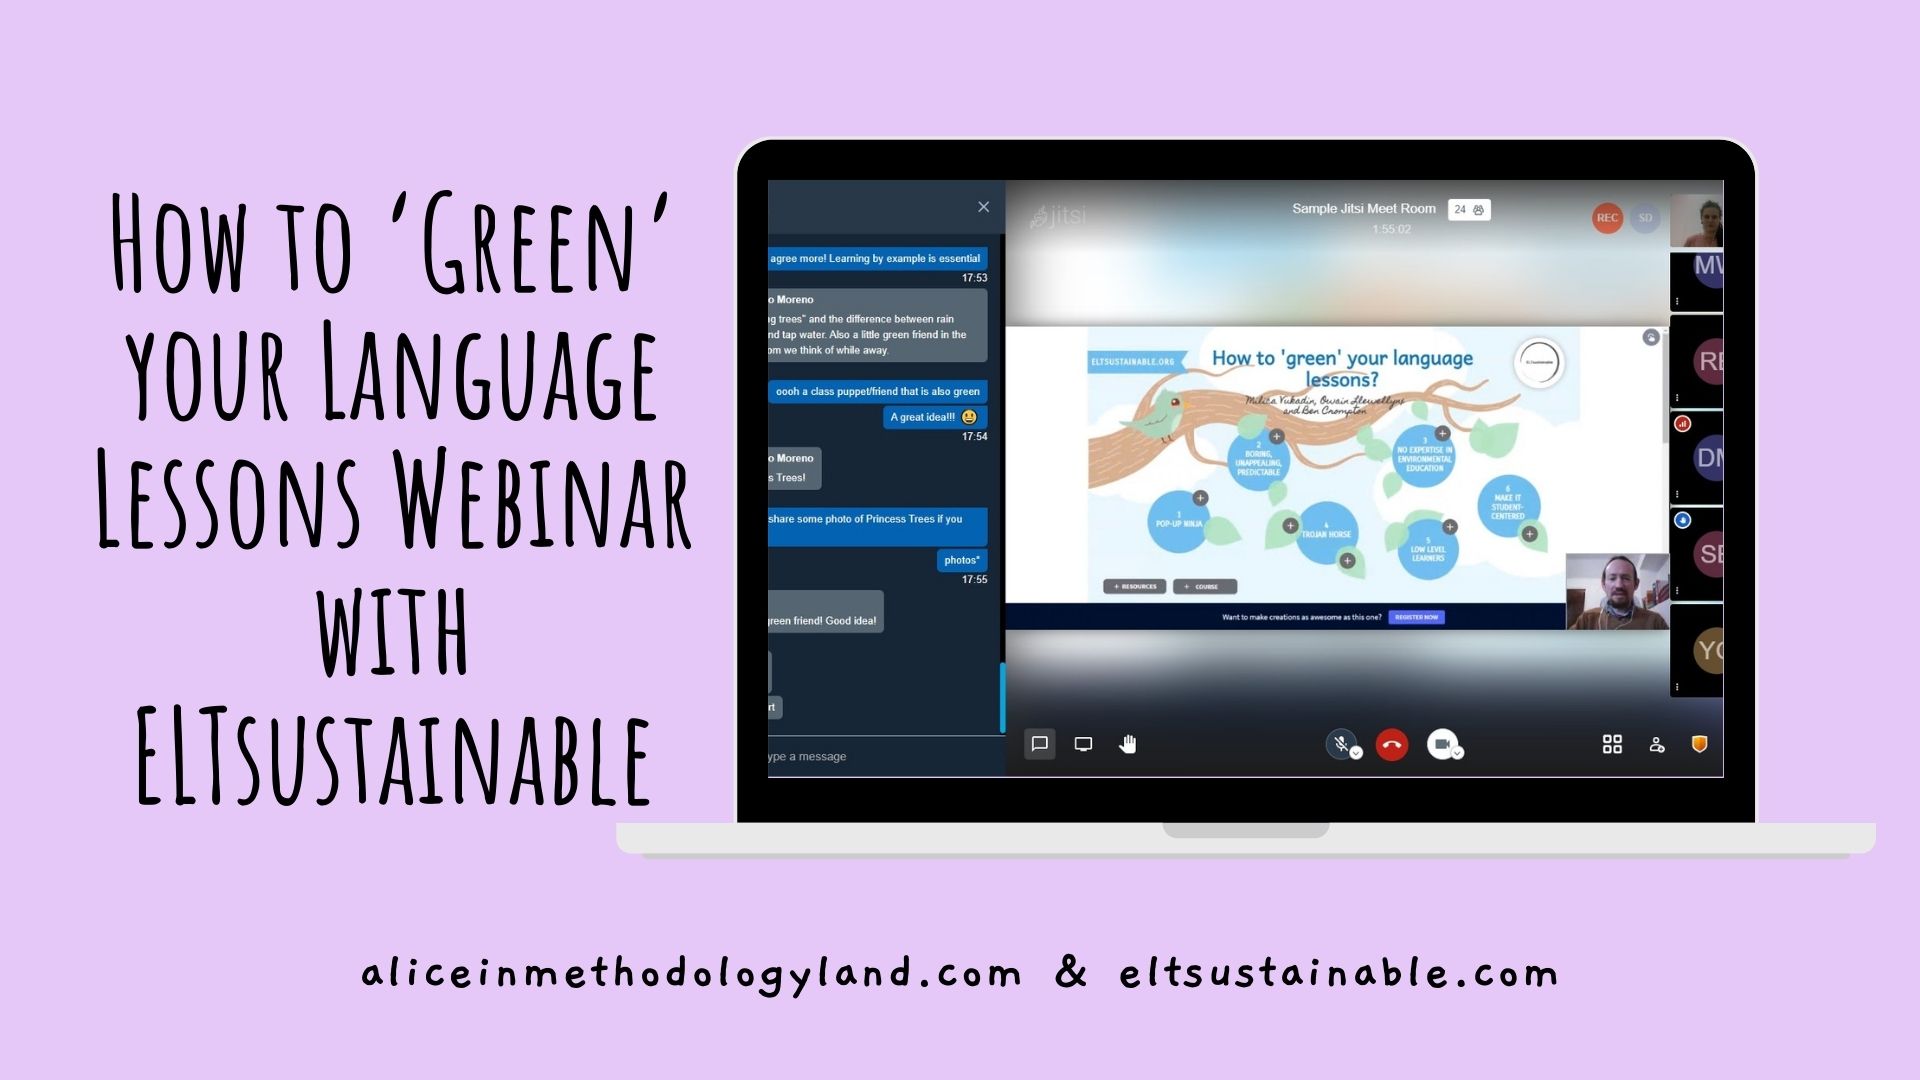 How to ‘Green’ your Language Lessons Webinar with ELTsustainable: Sustainable English Lessons